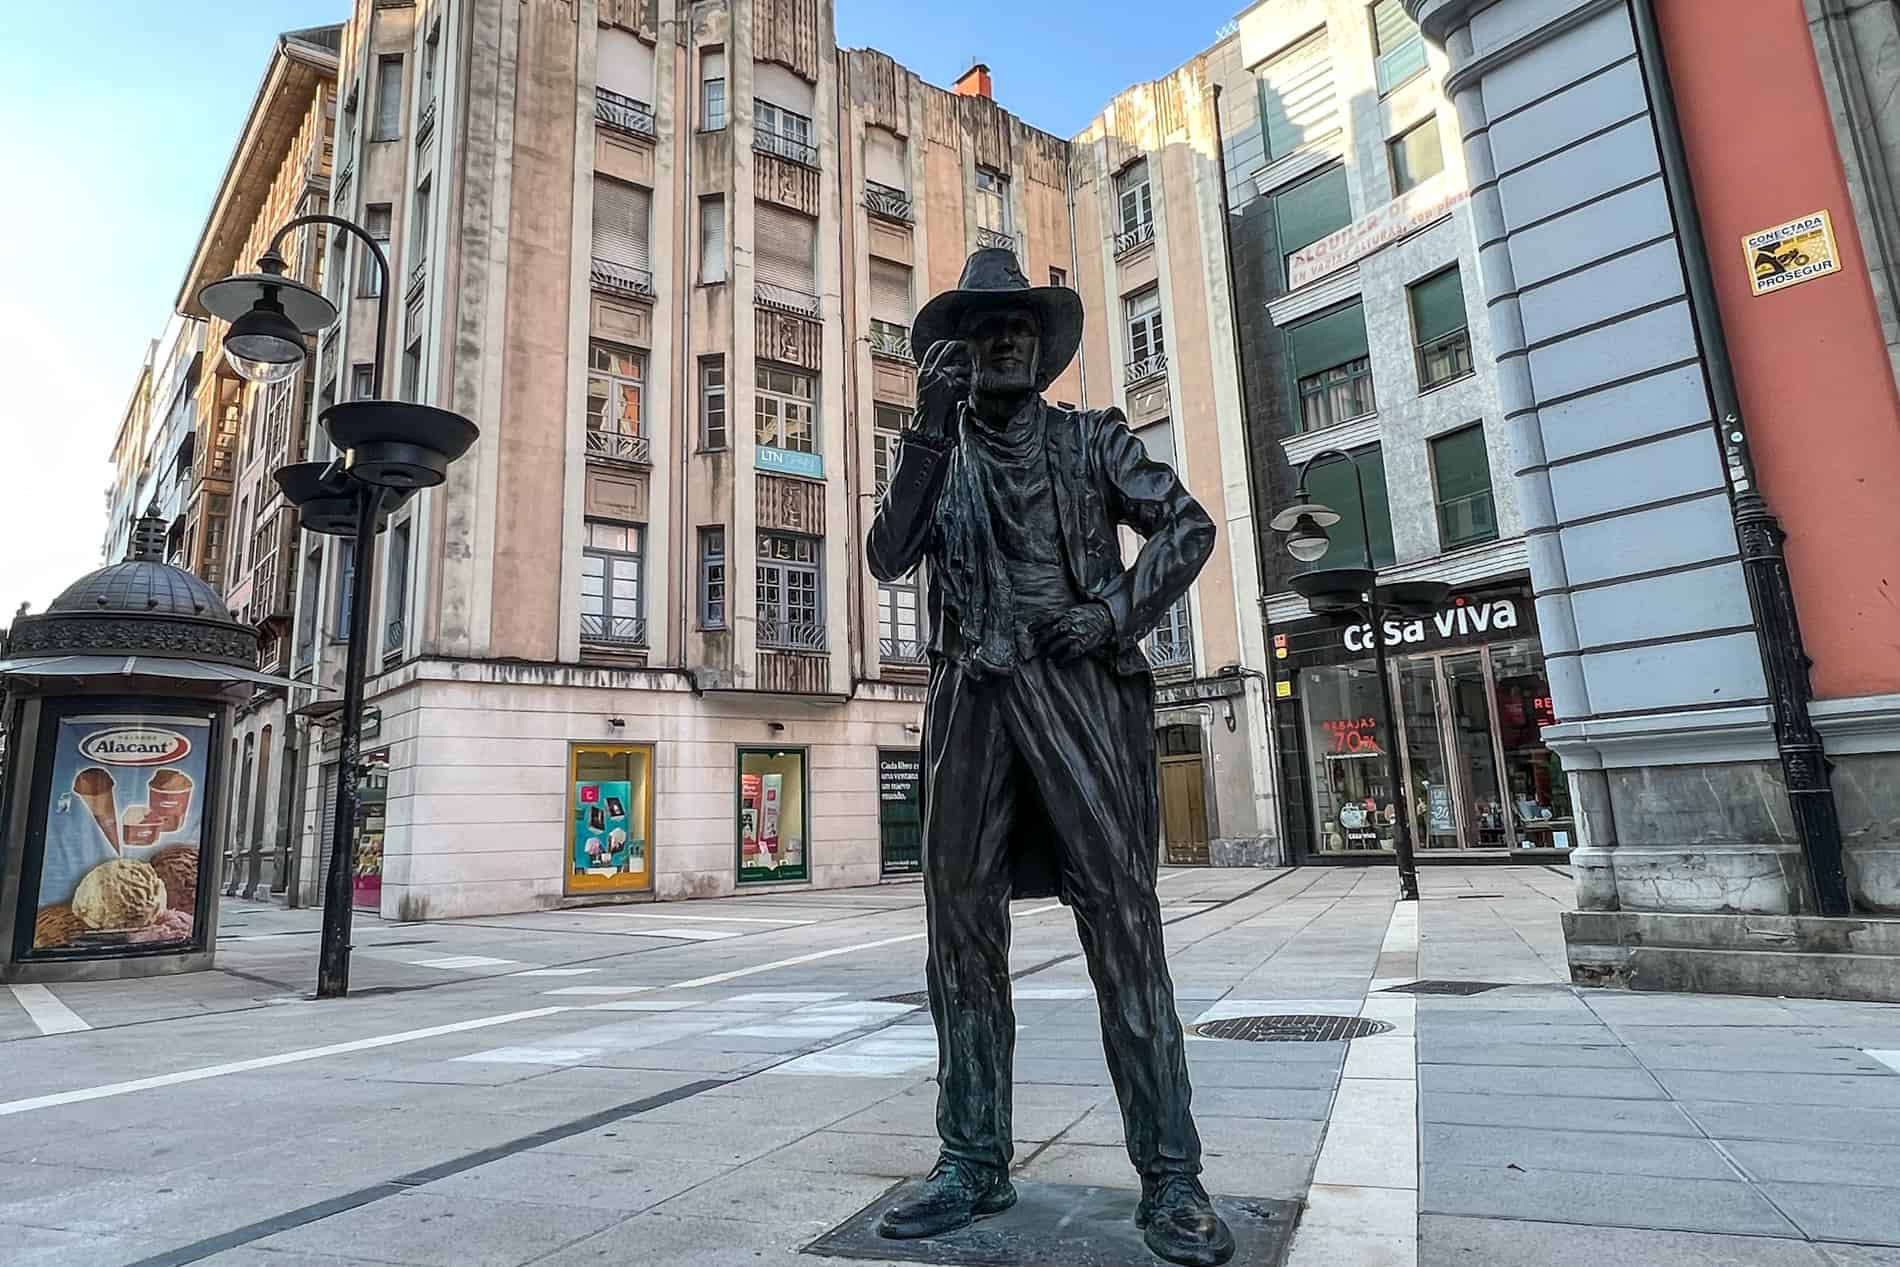 The ‘Casal’ statue in Oviedo is life sized statue of Asturian singer, Tino Casal, which stands in the middle of a street in front of shop buildings. 